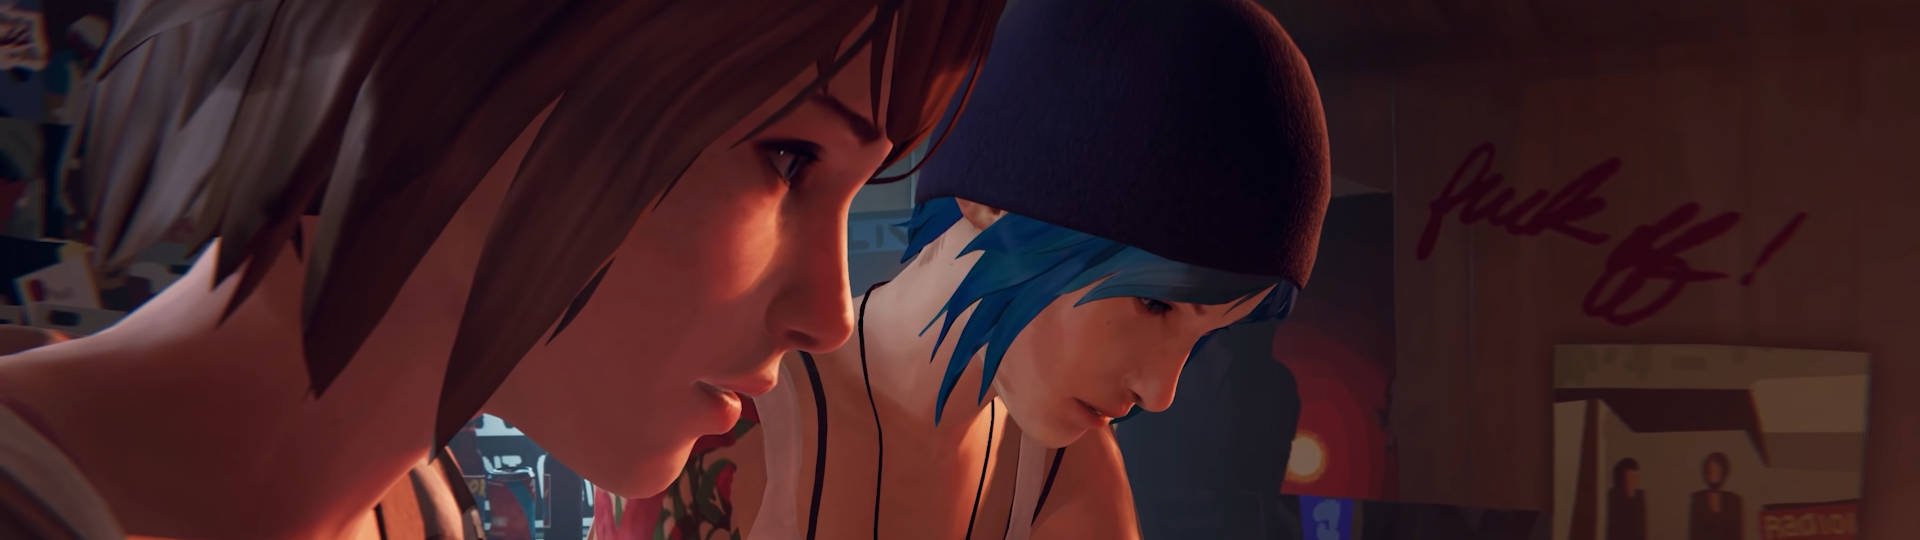 Square Enix Life is Strange Just Cause Outriders slice